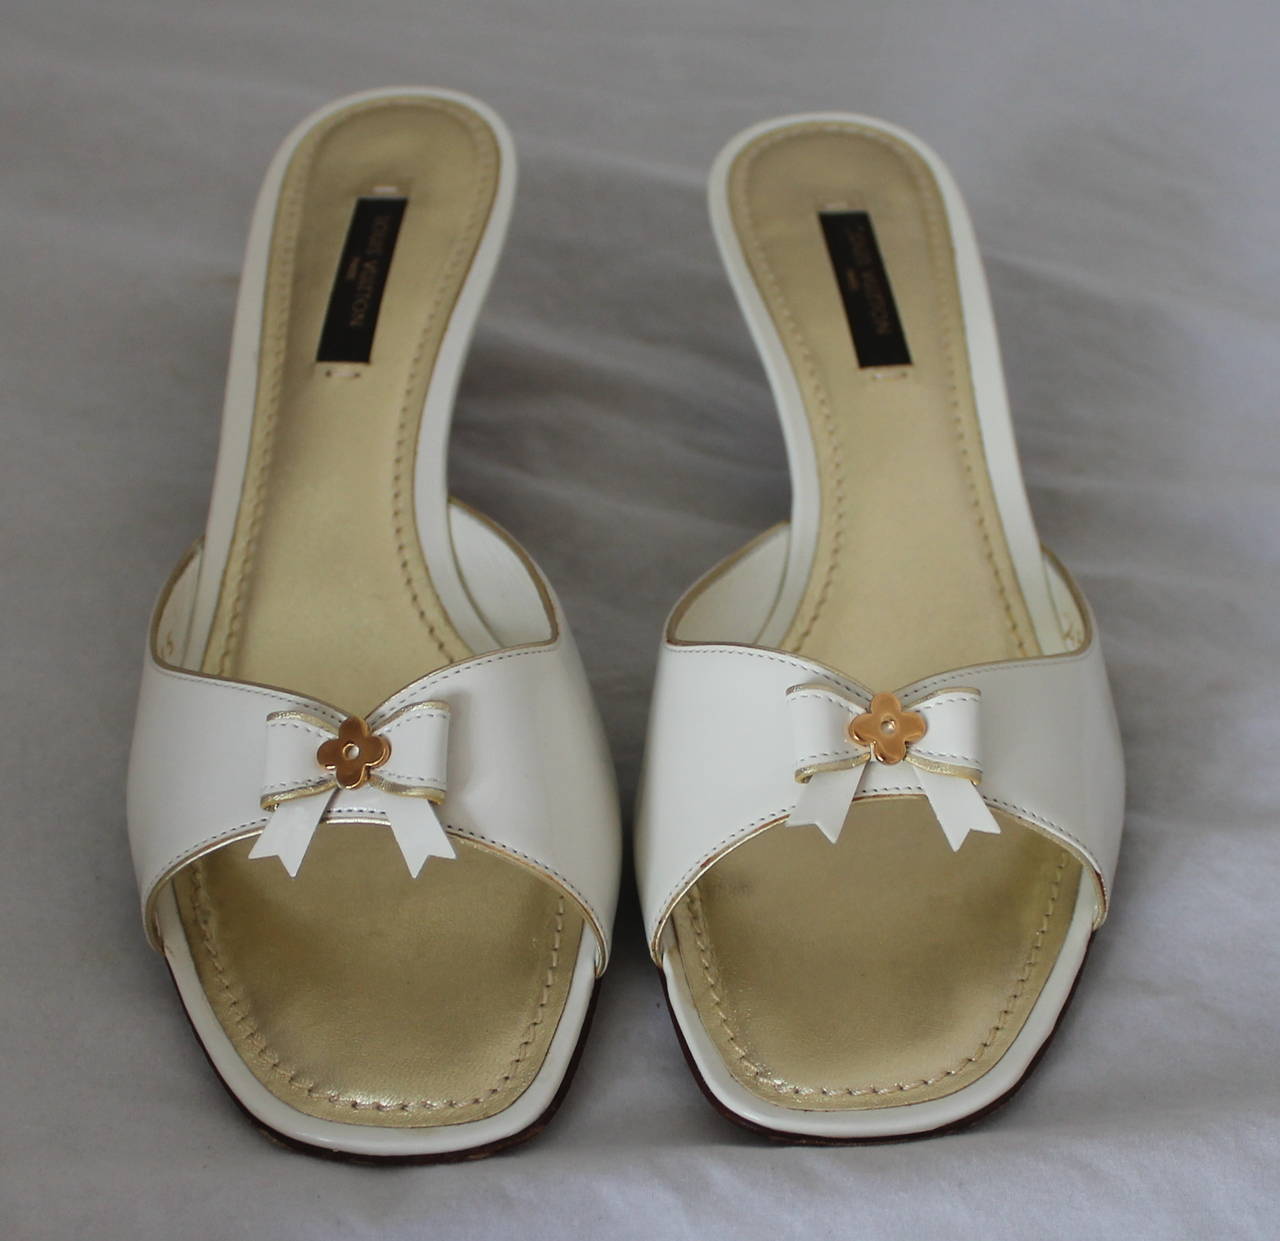 Louis Vuitton White Patent Slides with Bow & Kitten Heel - 38.5. These shoes are in very good condition with some wear, specifically on the bottom.